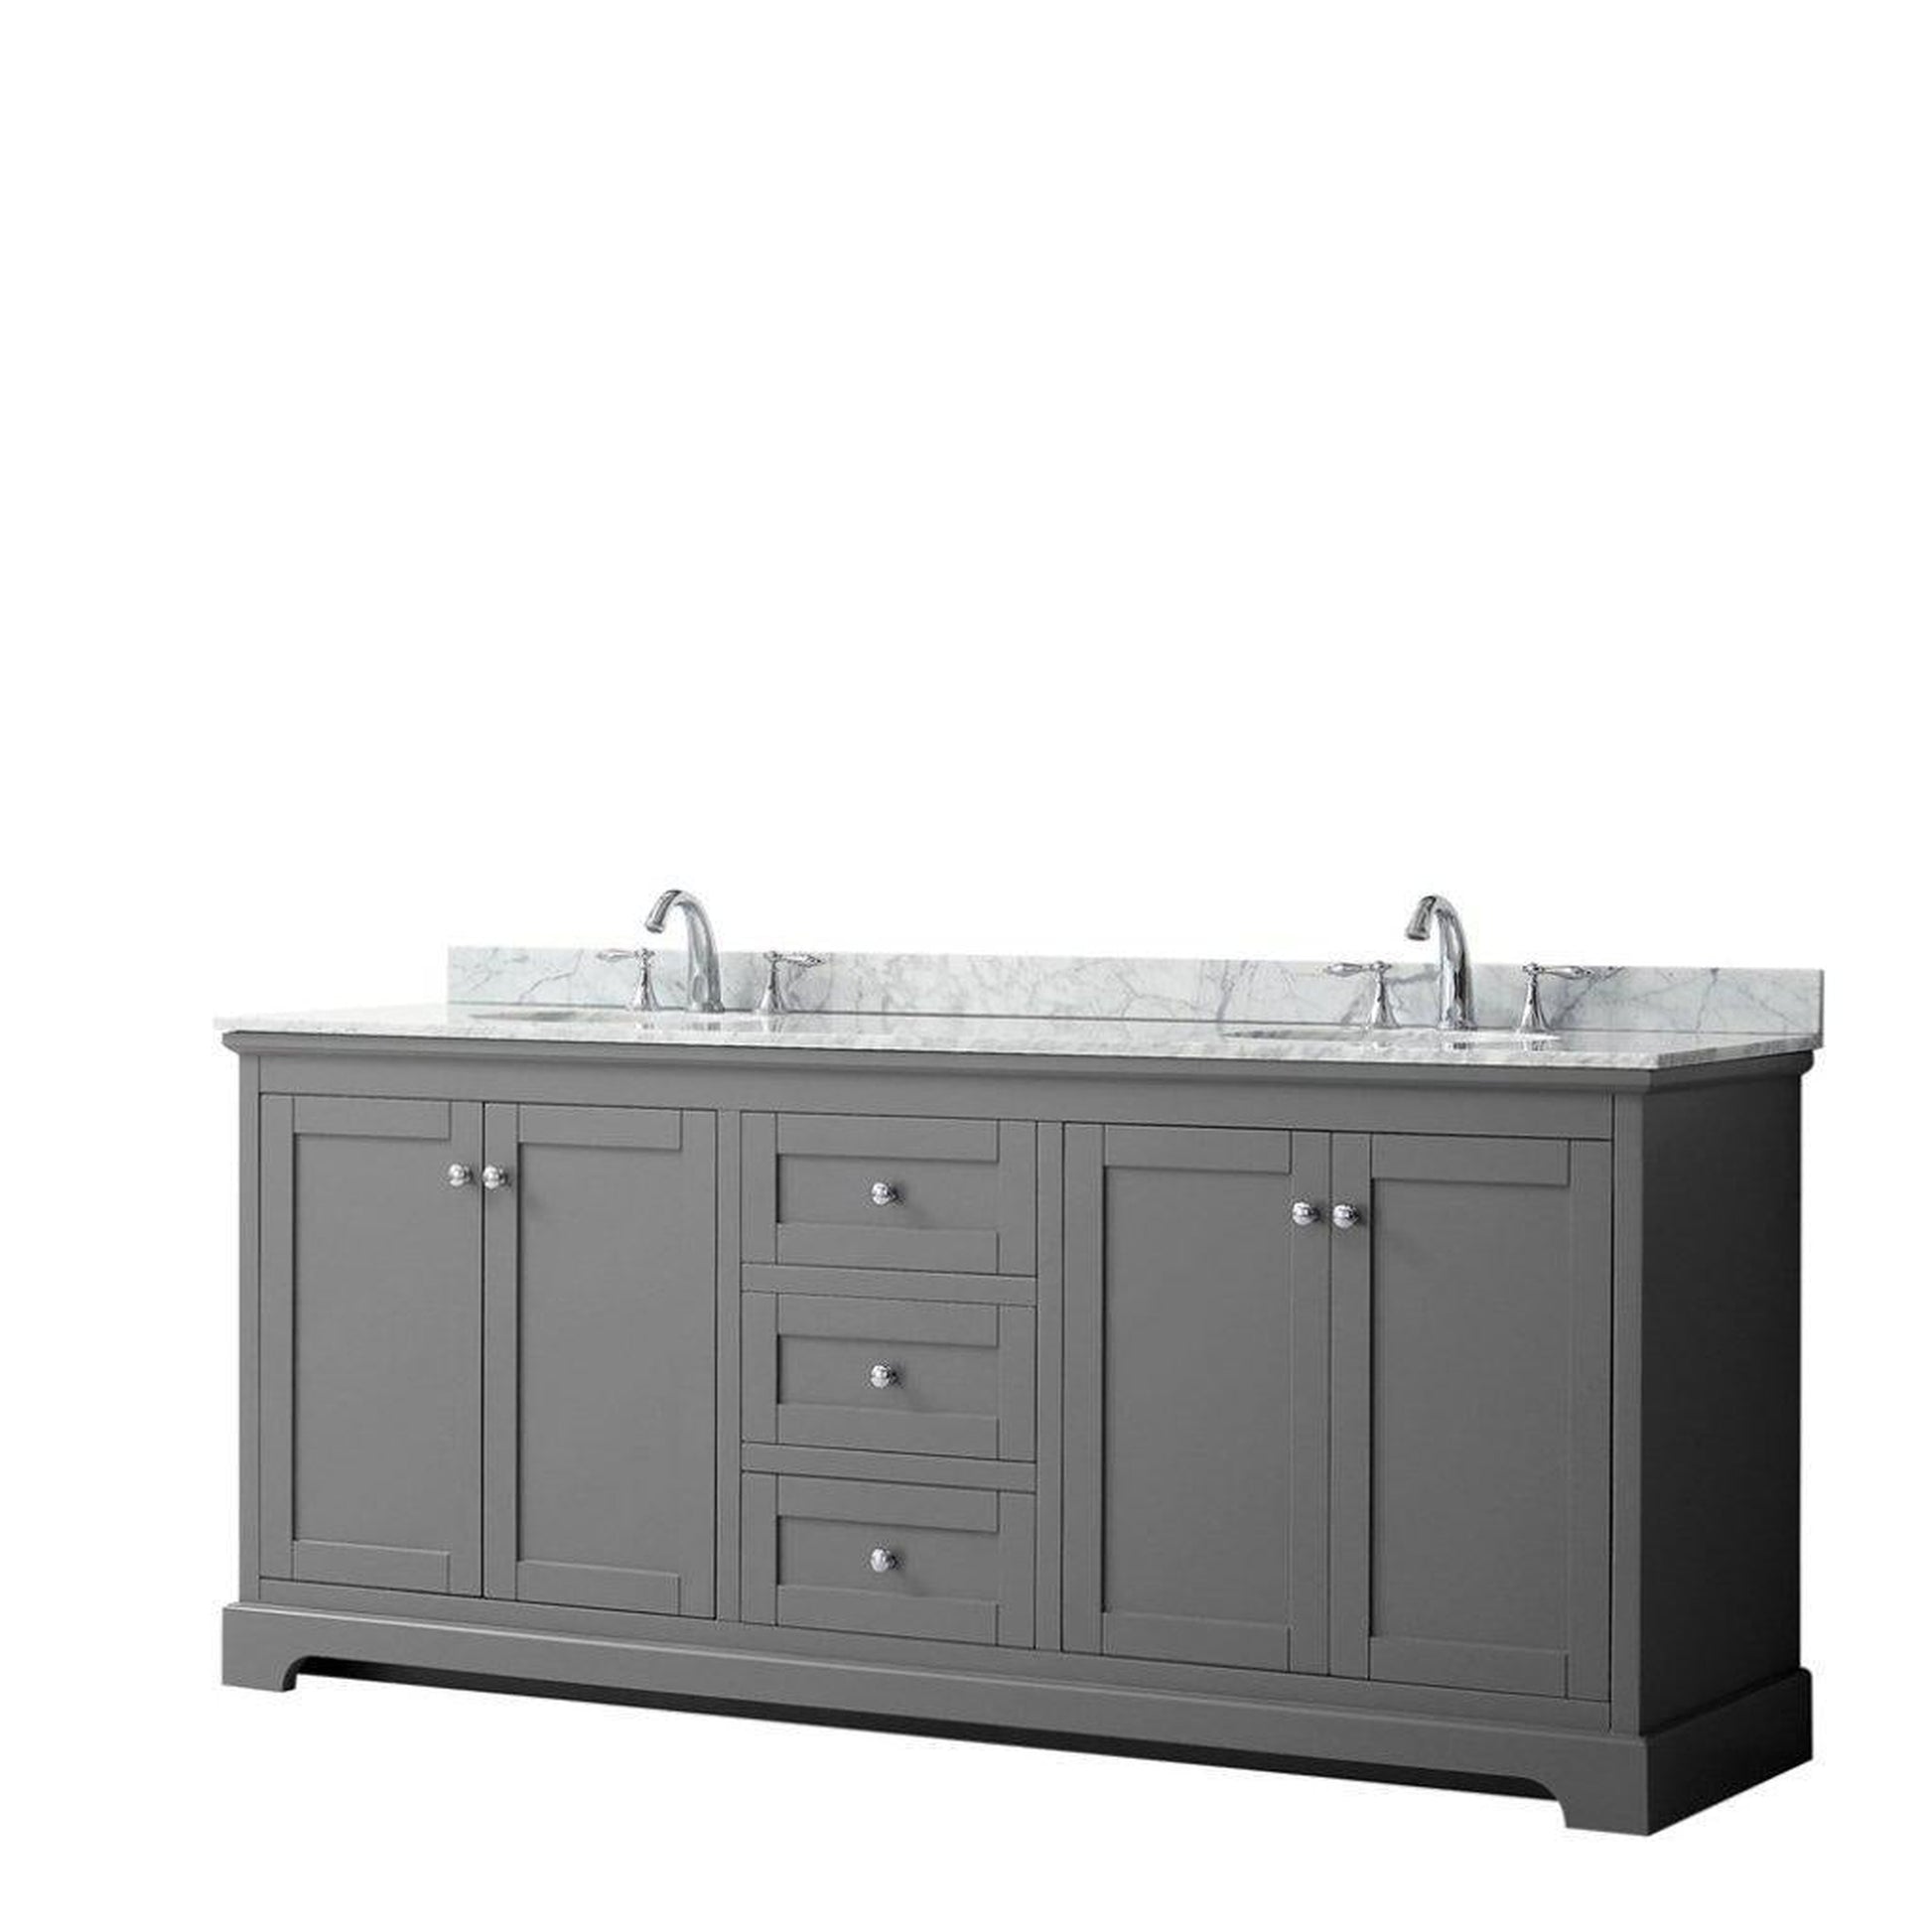 Wyndham Collection Avery 80" Dark Gray Double Bathroom Vanity With White Carrara Marble Countertop With 3-Hole Faucet And 8" Oval Sink